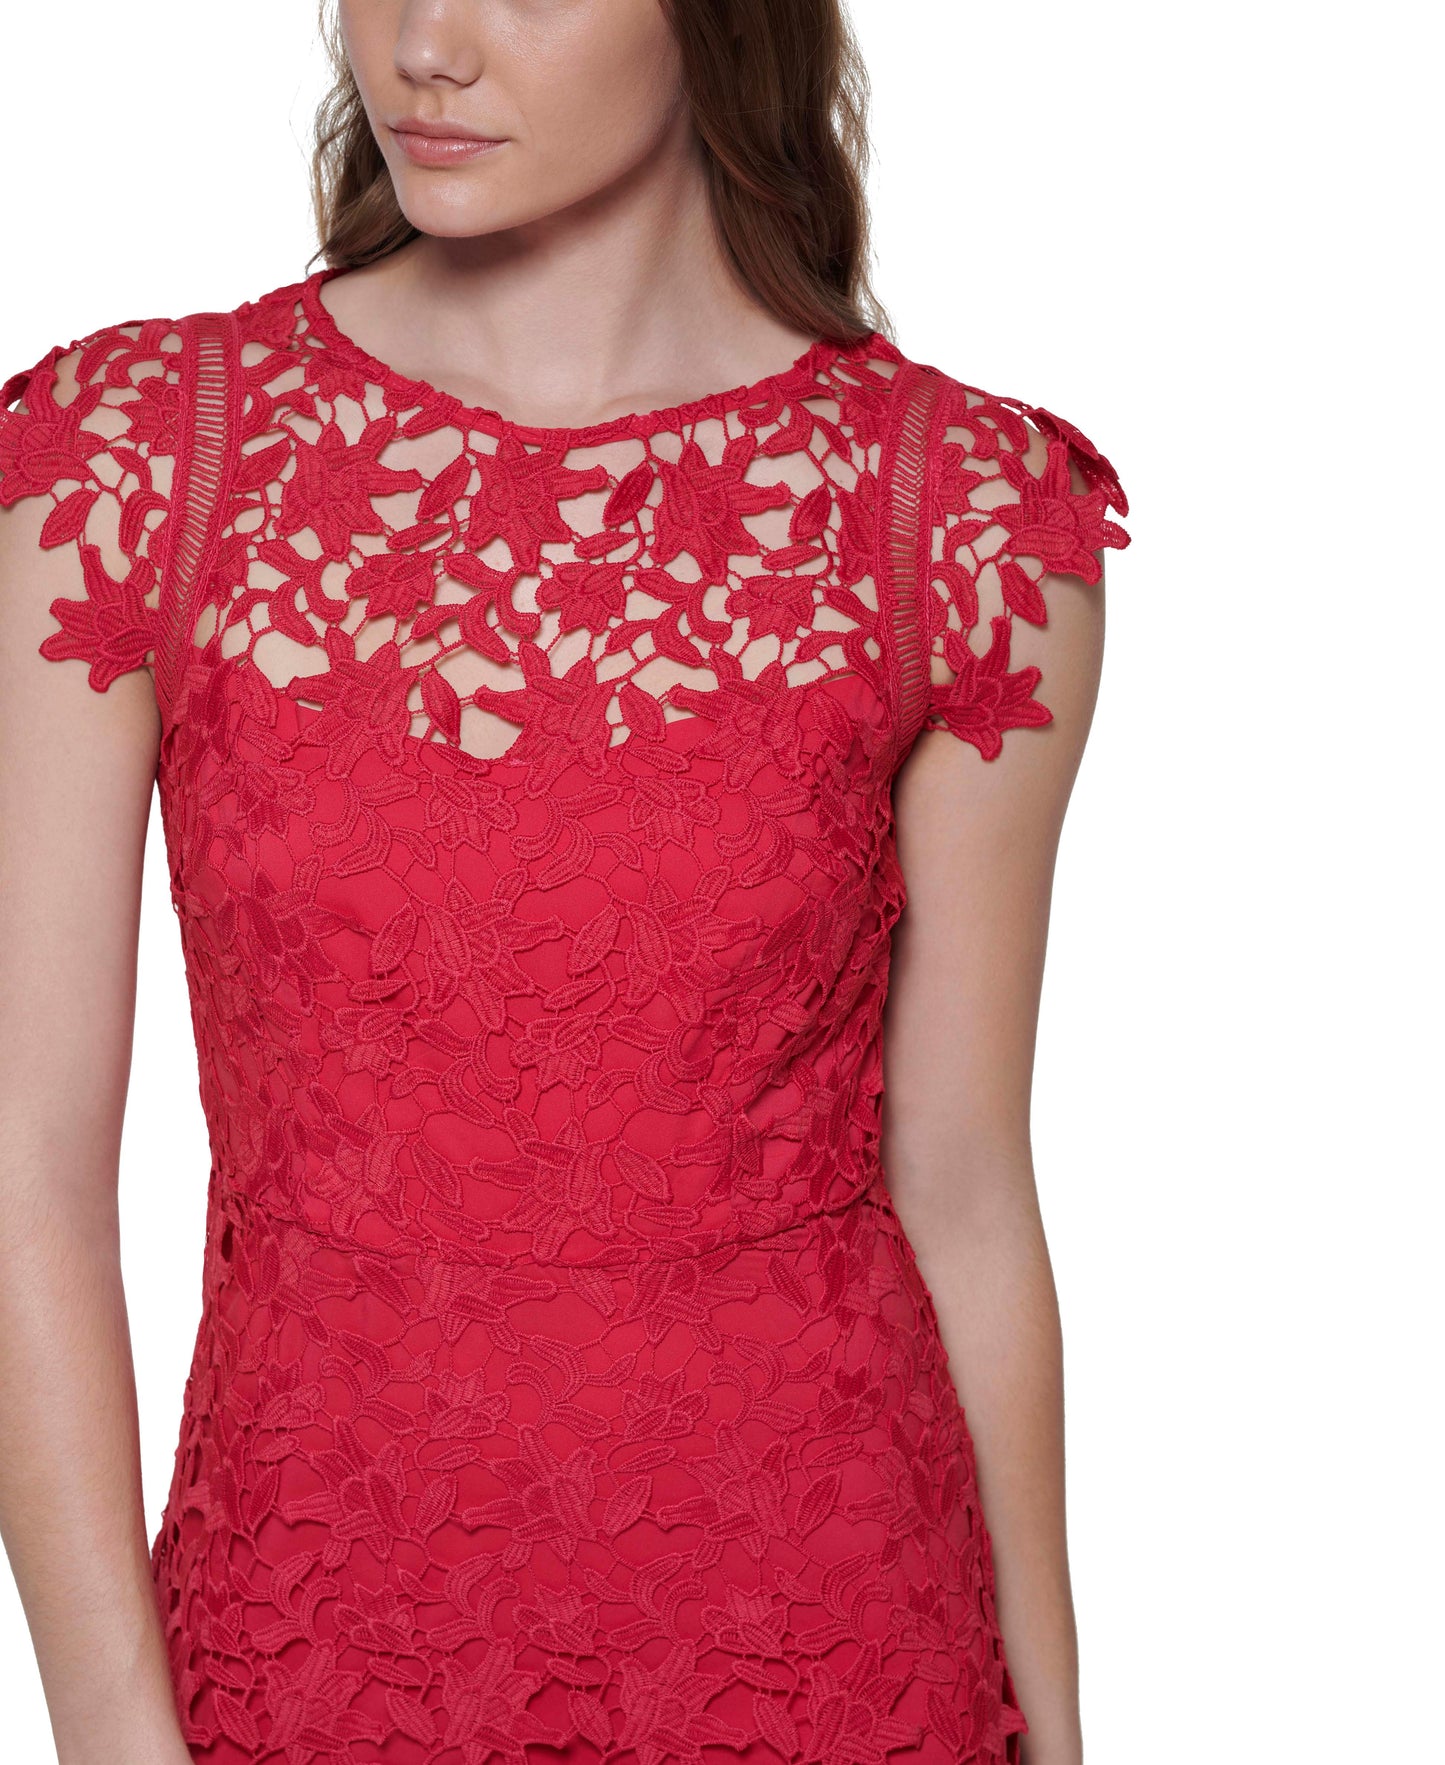 Sleeveless Lace Fit and Flare Dress by Eliza J in Fuchsia